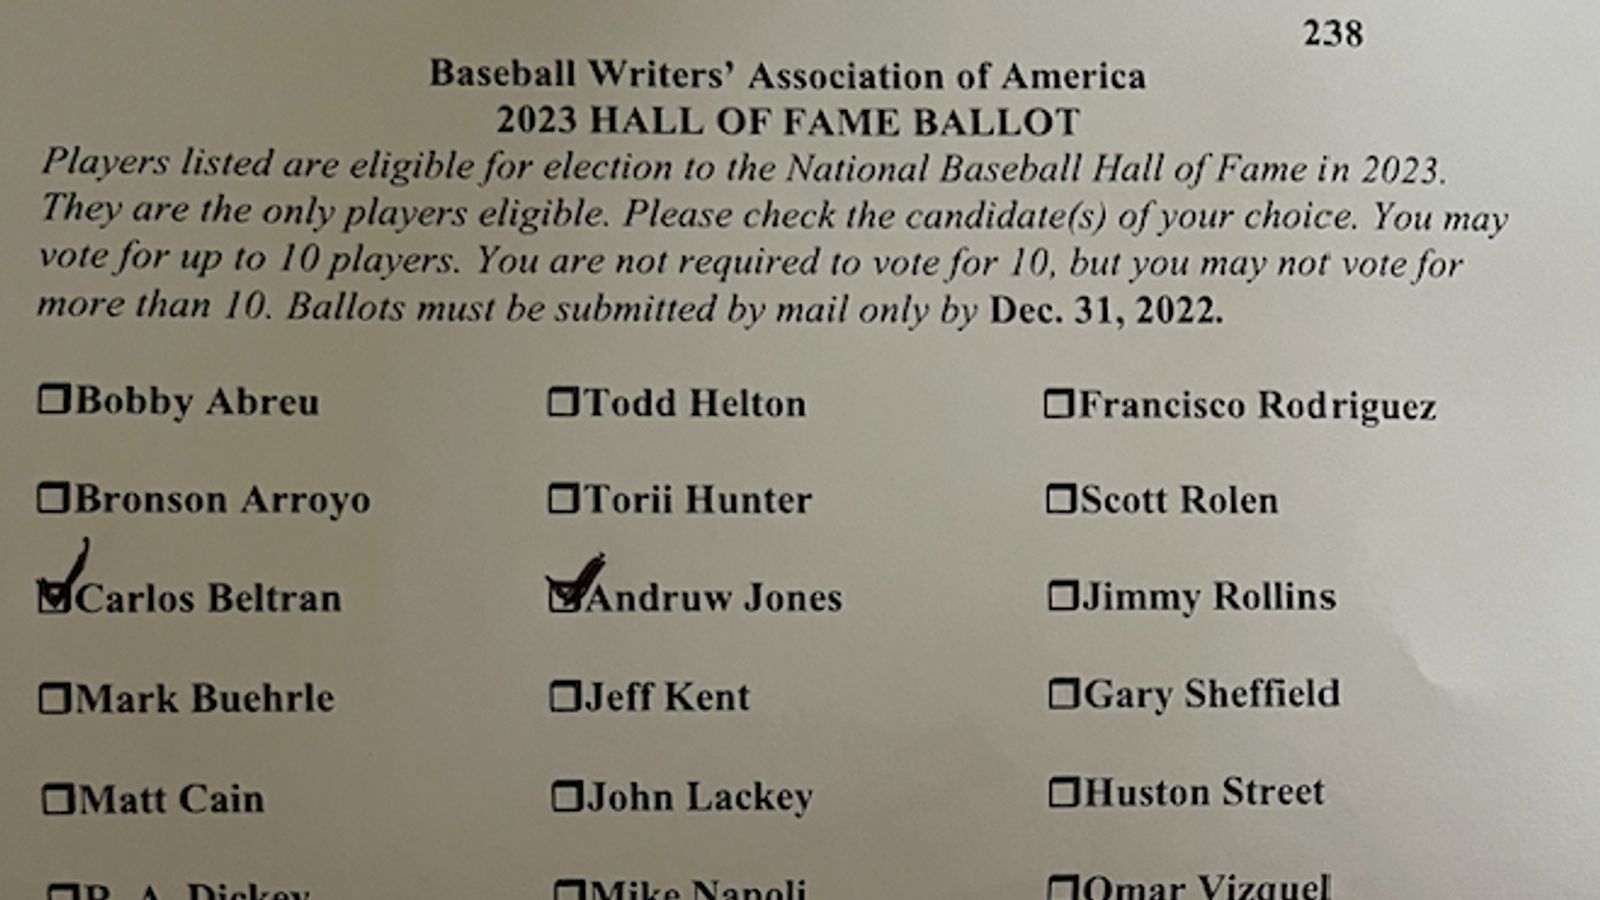 Jayson Werth Receives No Hall of Fame votes, Rolen Inducted